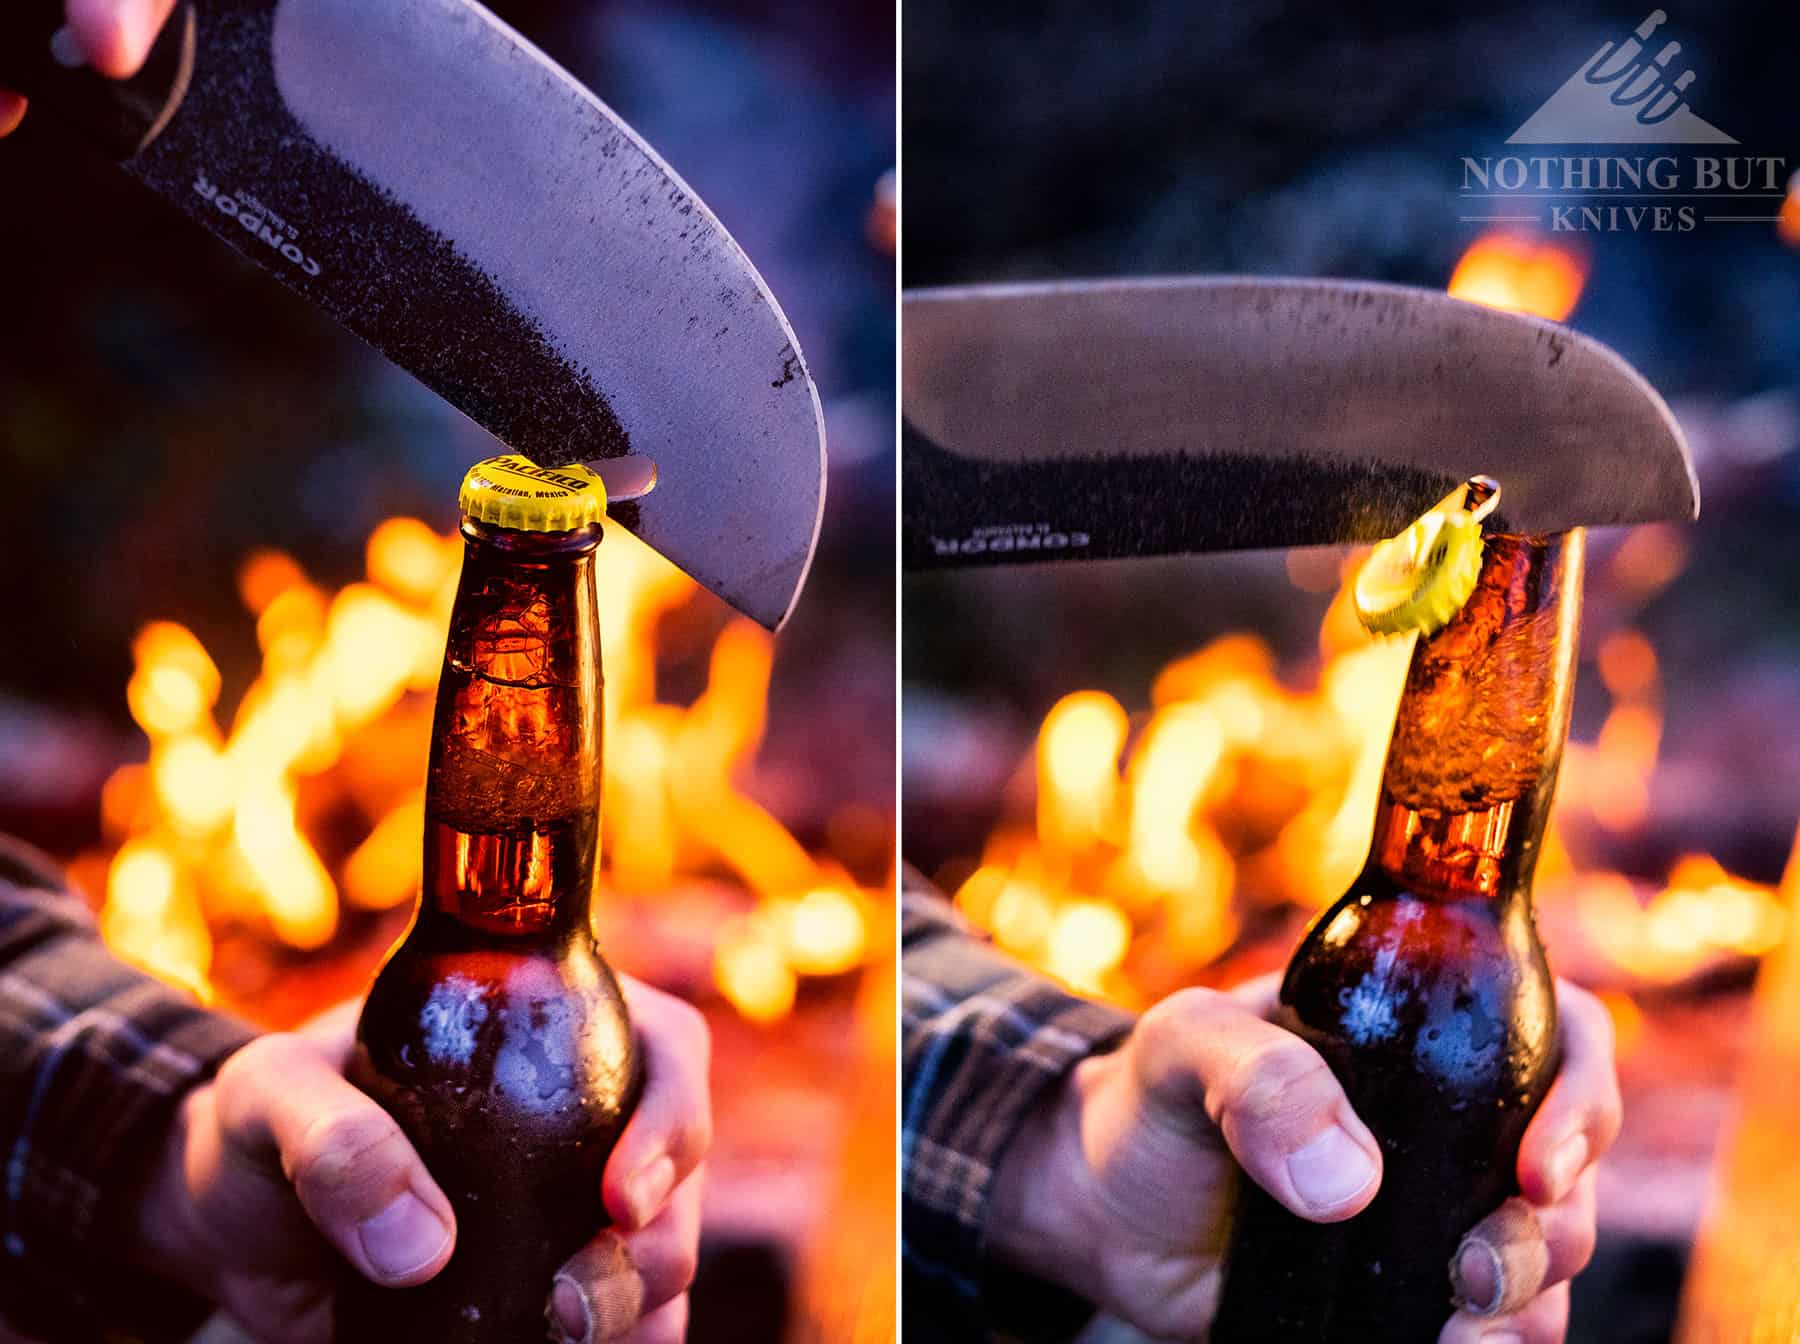 This two image montage shows the technique for using the Condor Bush Slicer blade notch as a bottle opener.